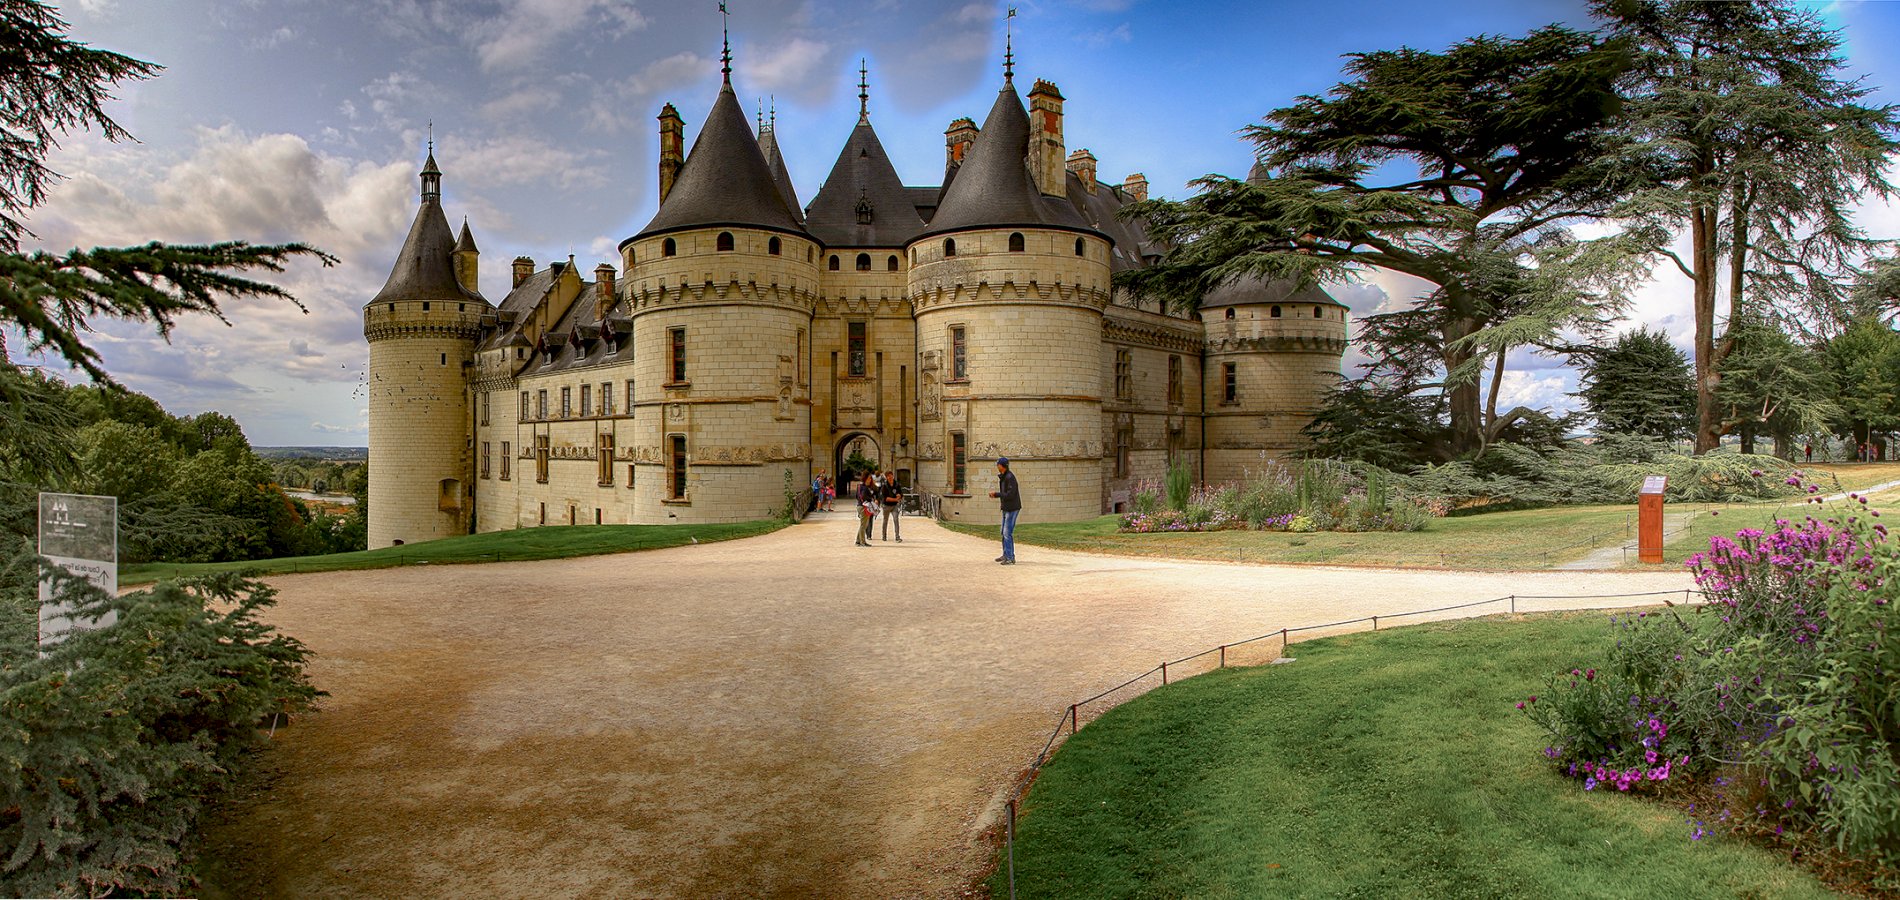 Ophorus Tours - A Private Loire Valley Day Trip from Tours to Chaumont & Chenonceau Castles